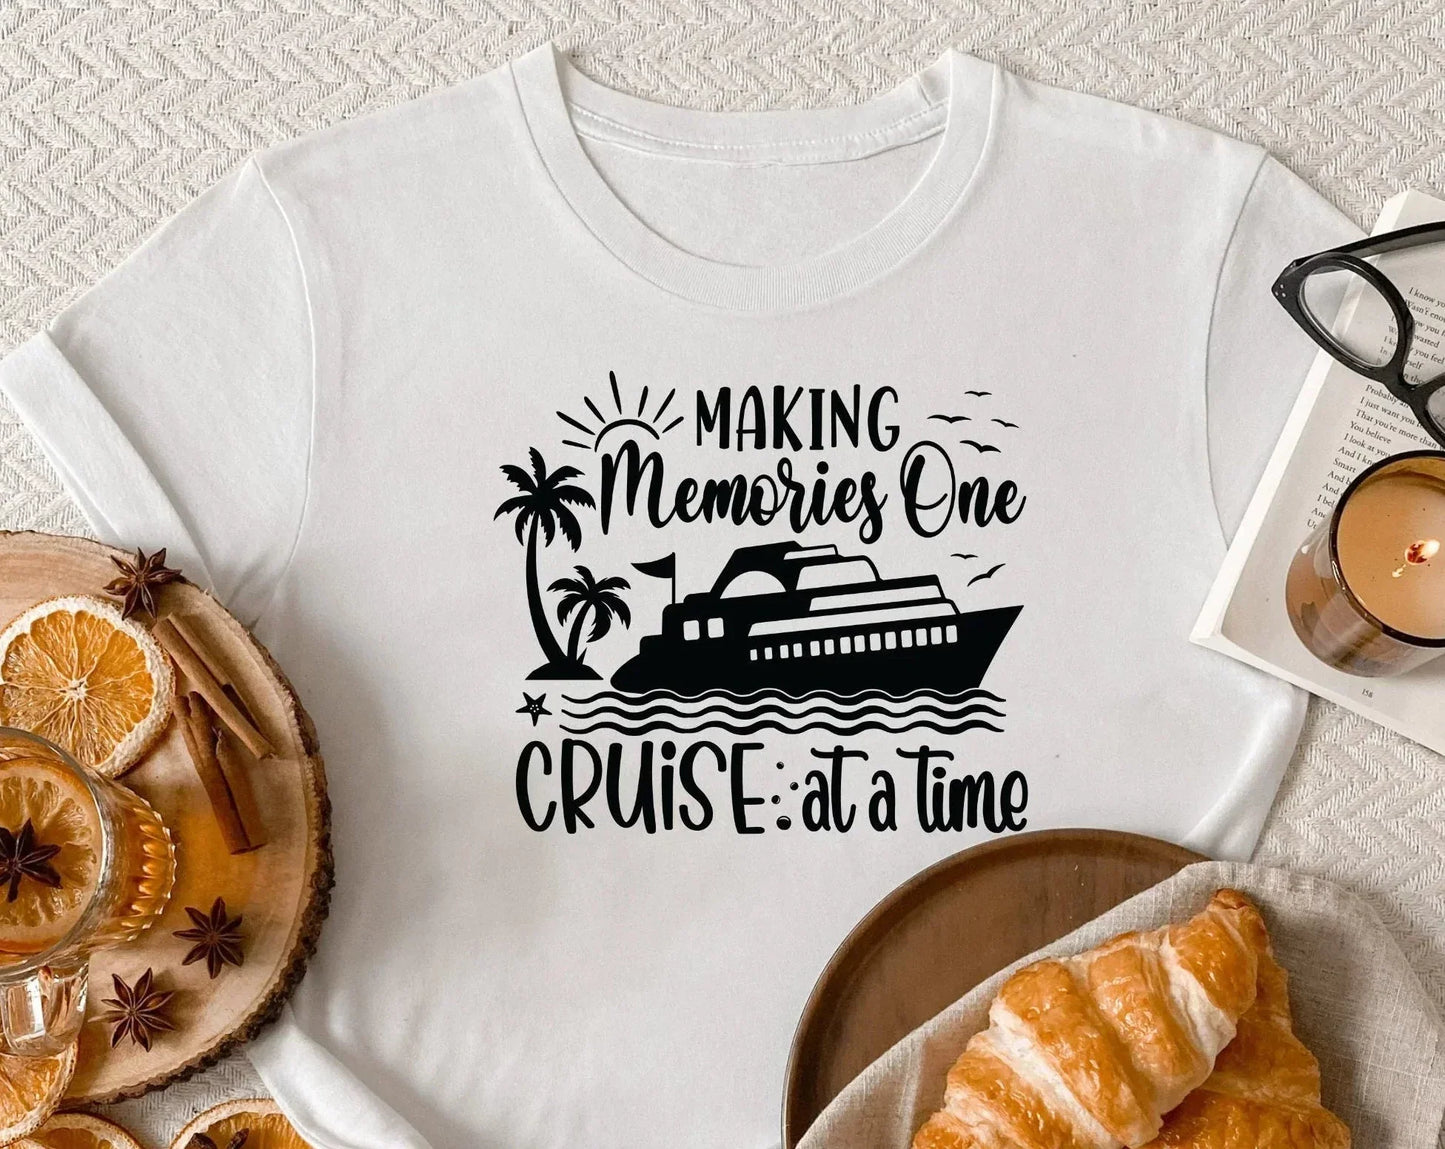 Making Memories One Cruise At a Time, Family Cruise Shirts